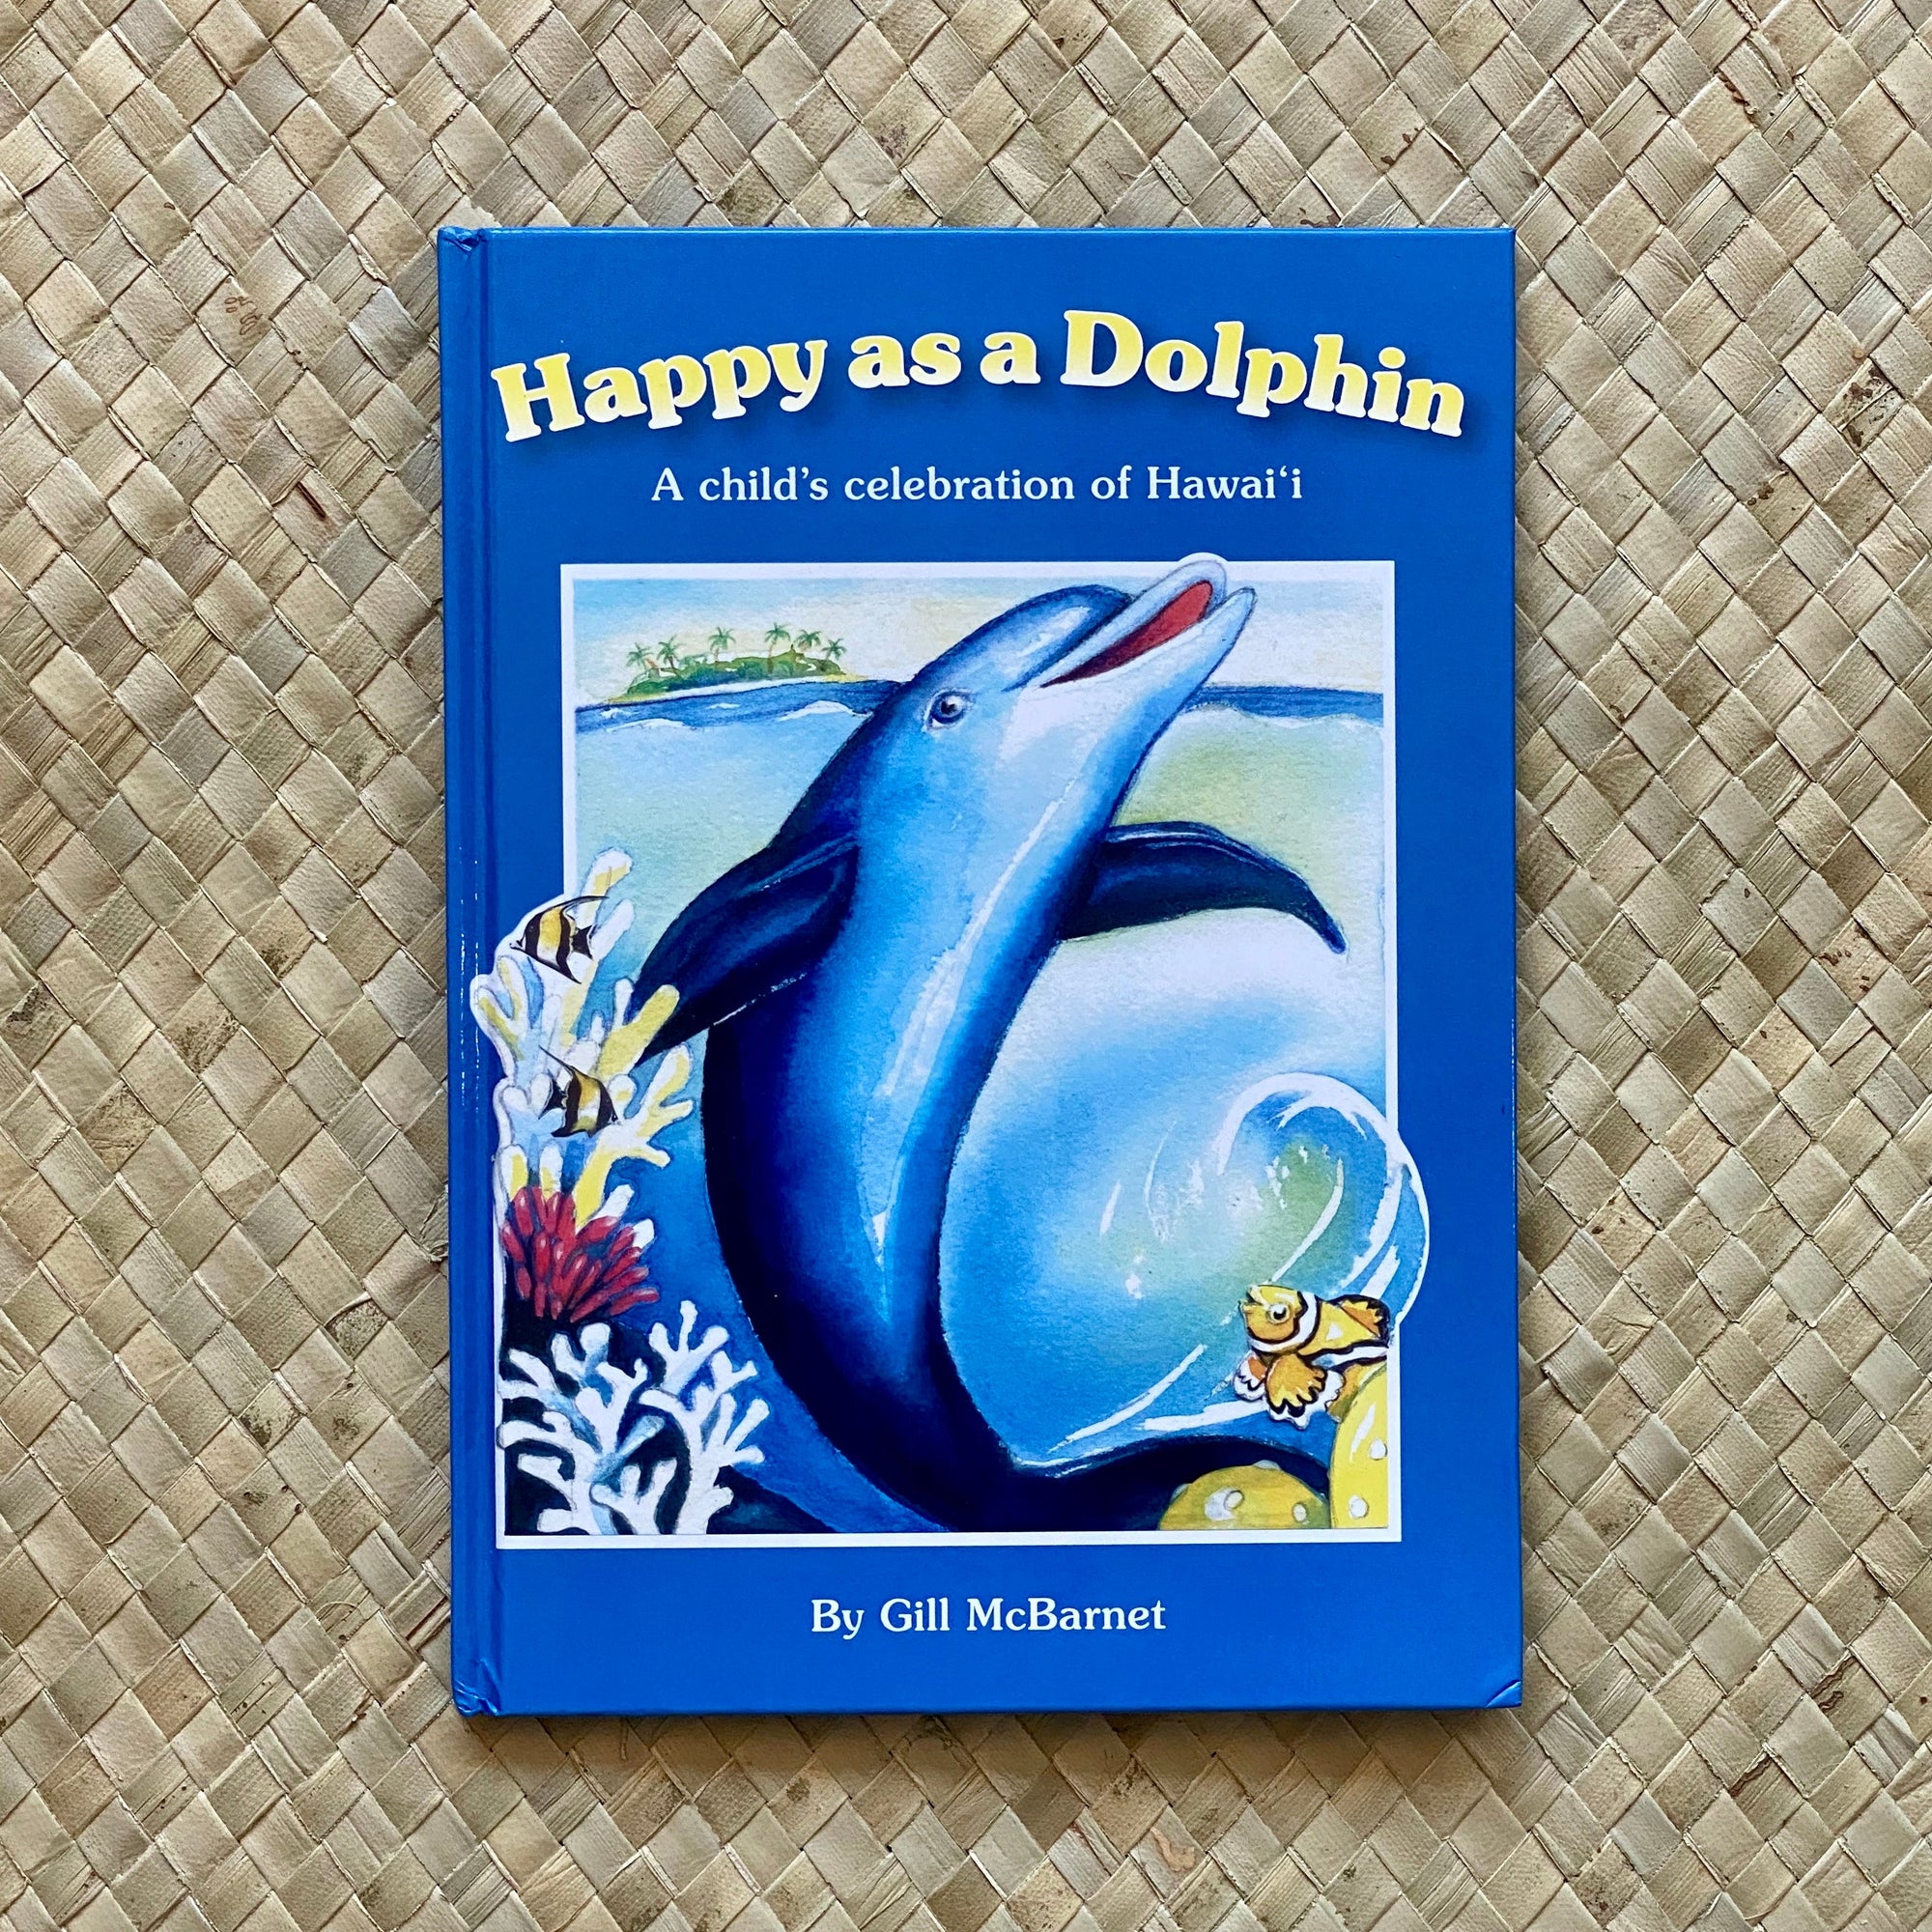 [SOLD OUT] Imperfect - Happy as a Dolphin